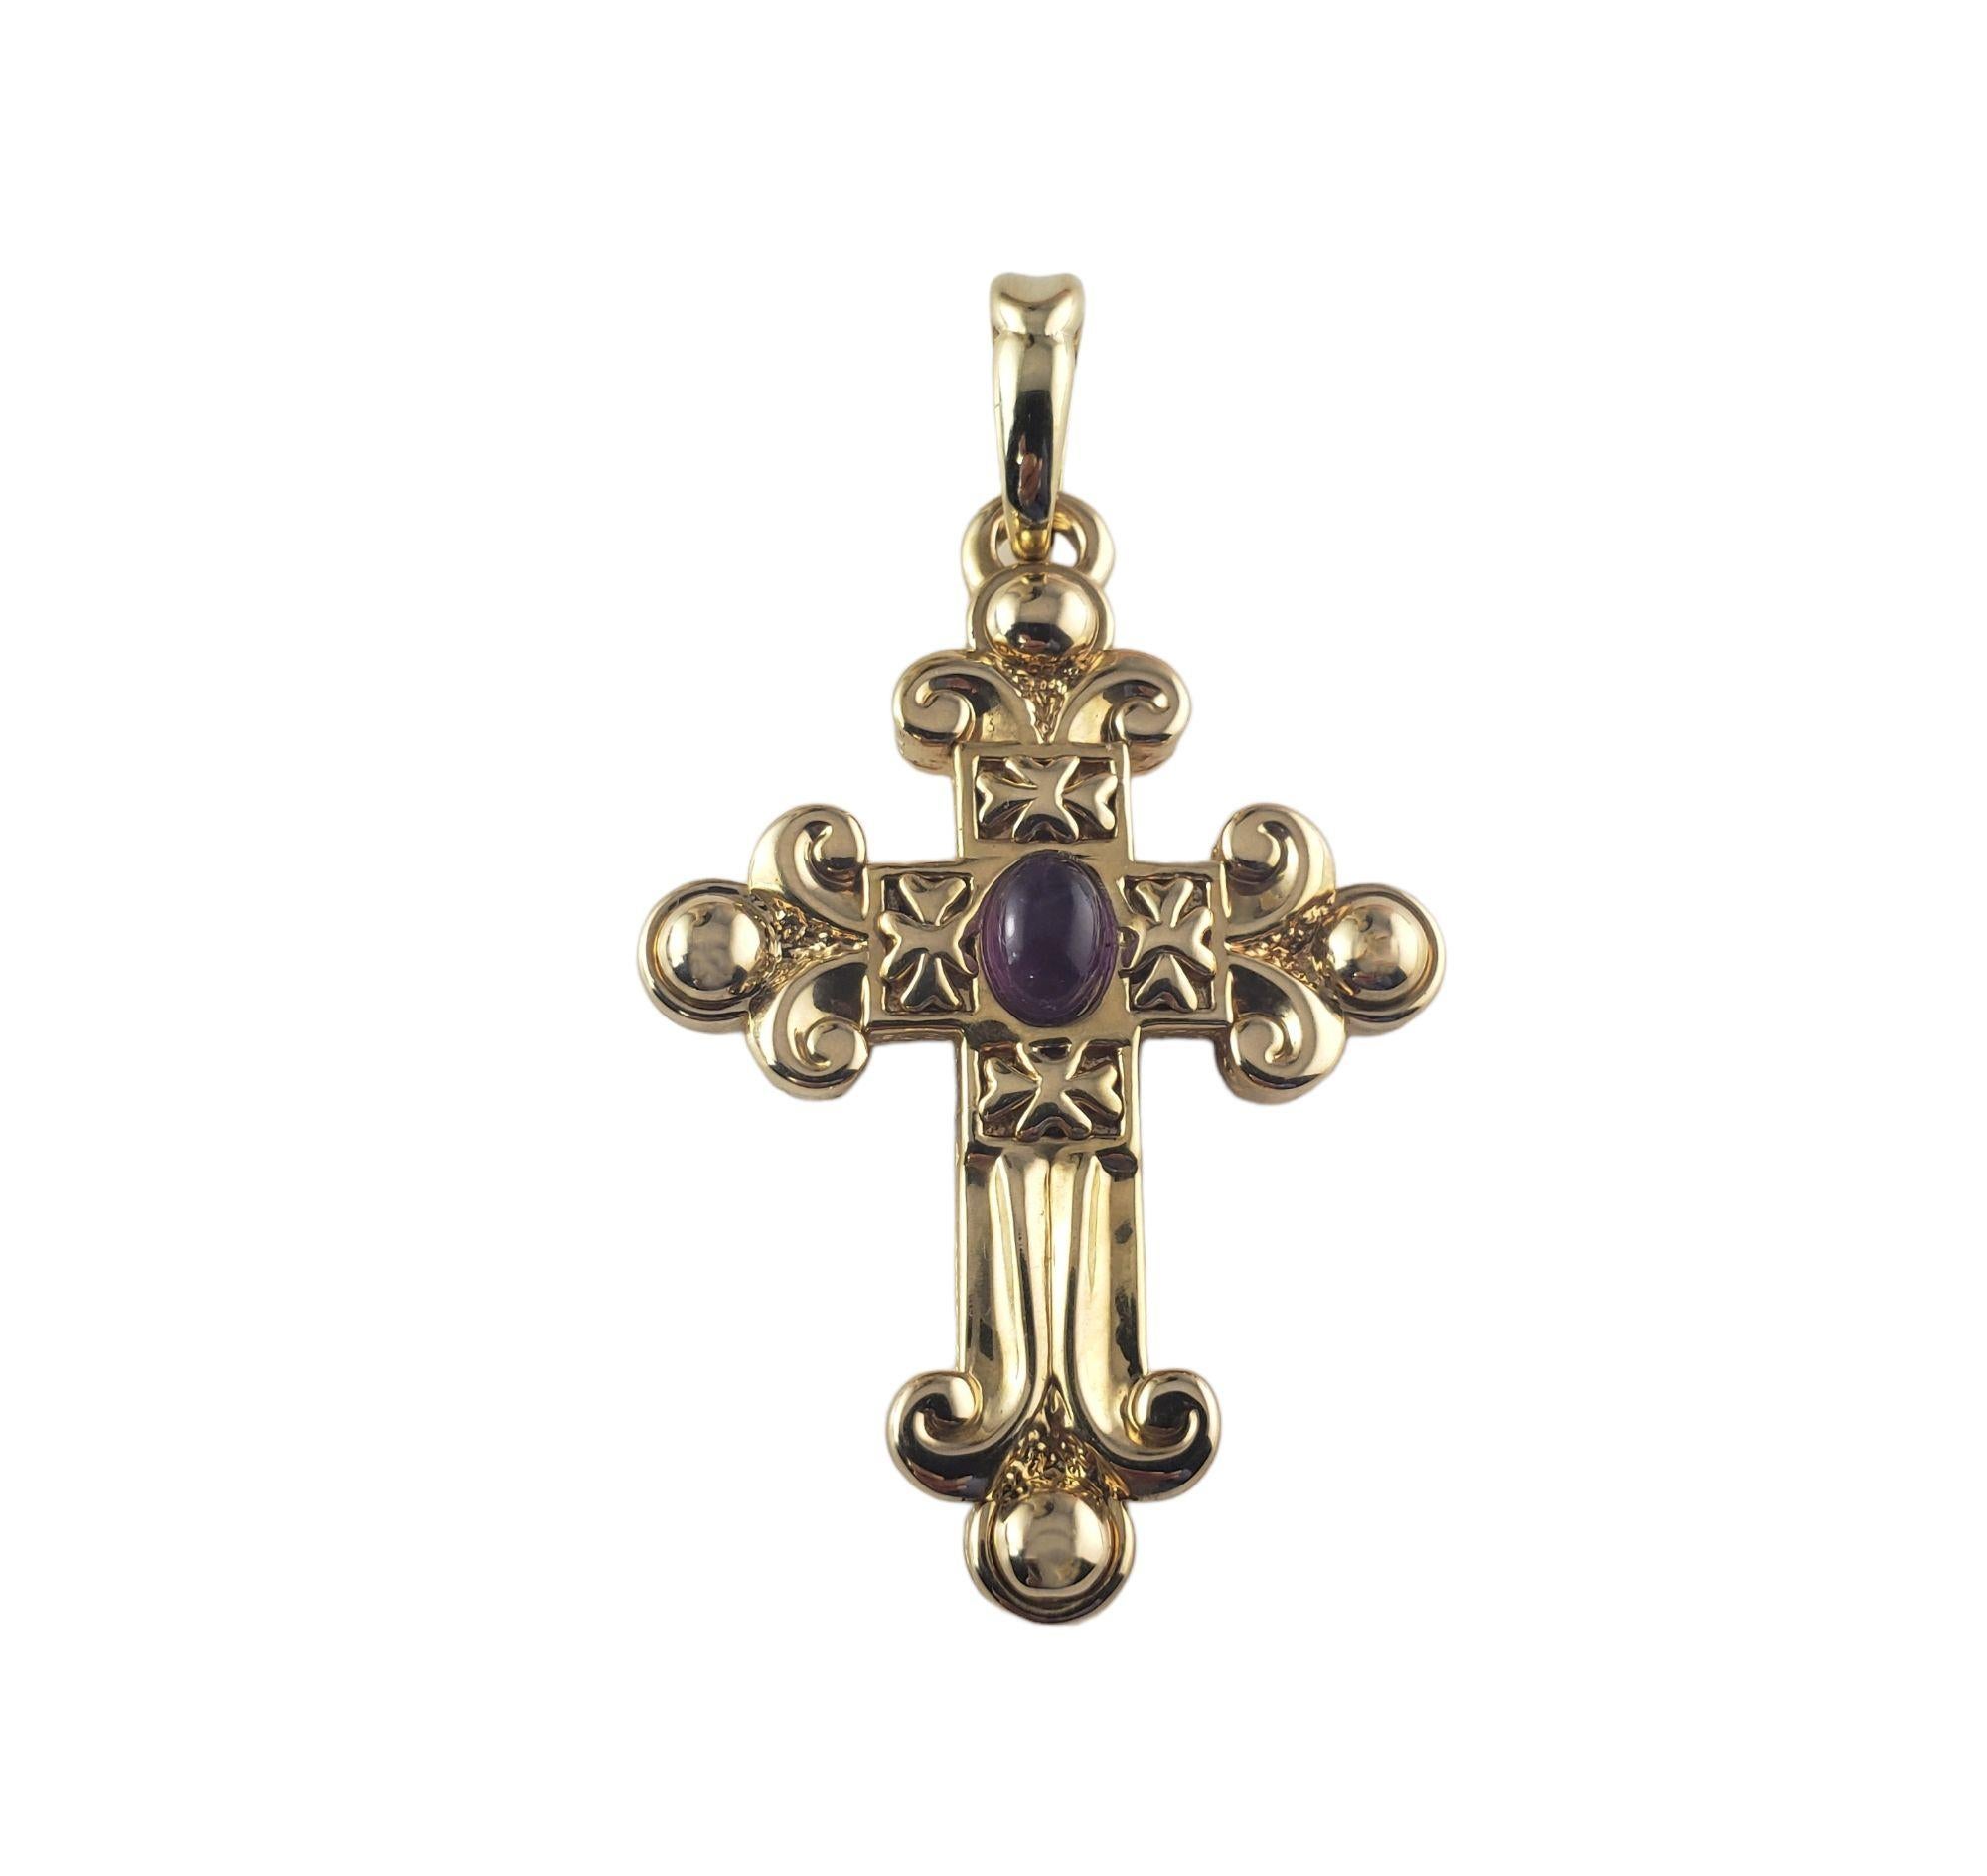 Vintage 18 Karat Yellow Gold and Amethyst across Pendant-

This lovely cross features one oval cabochon amethyst (7 mm x 5 mm) set in beautifully detailed 18K yellow gold.

Size: 50 mm x 34 mm

Weight:  5.7 gr./  3.6 dwt.

Stamped: 18K Italy

*Chain